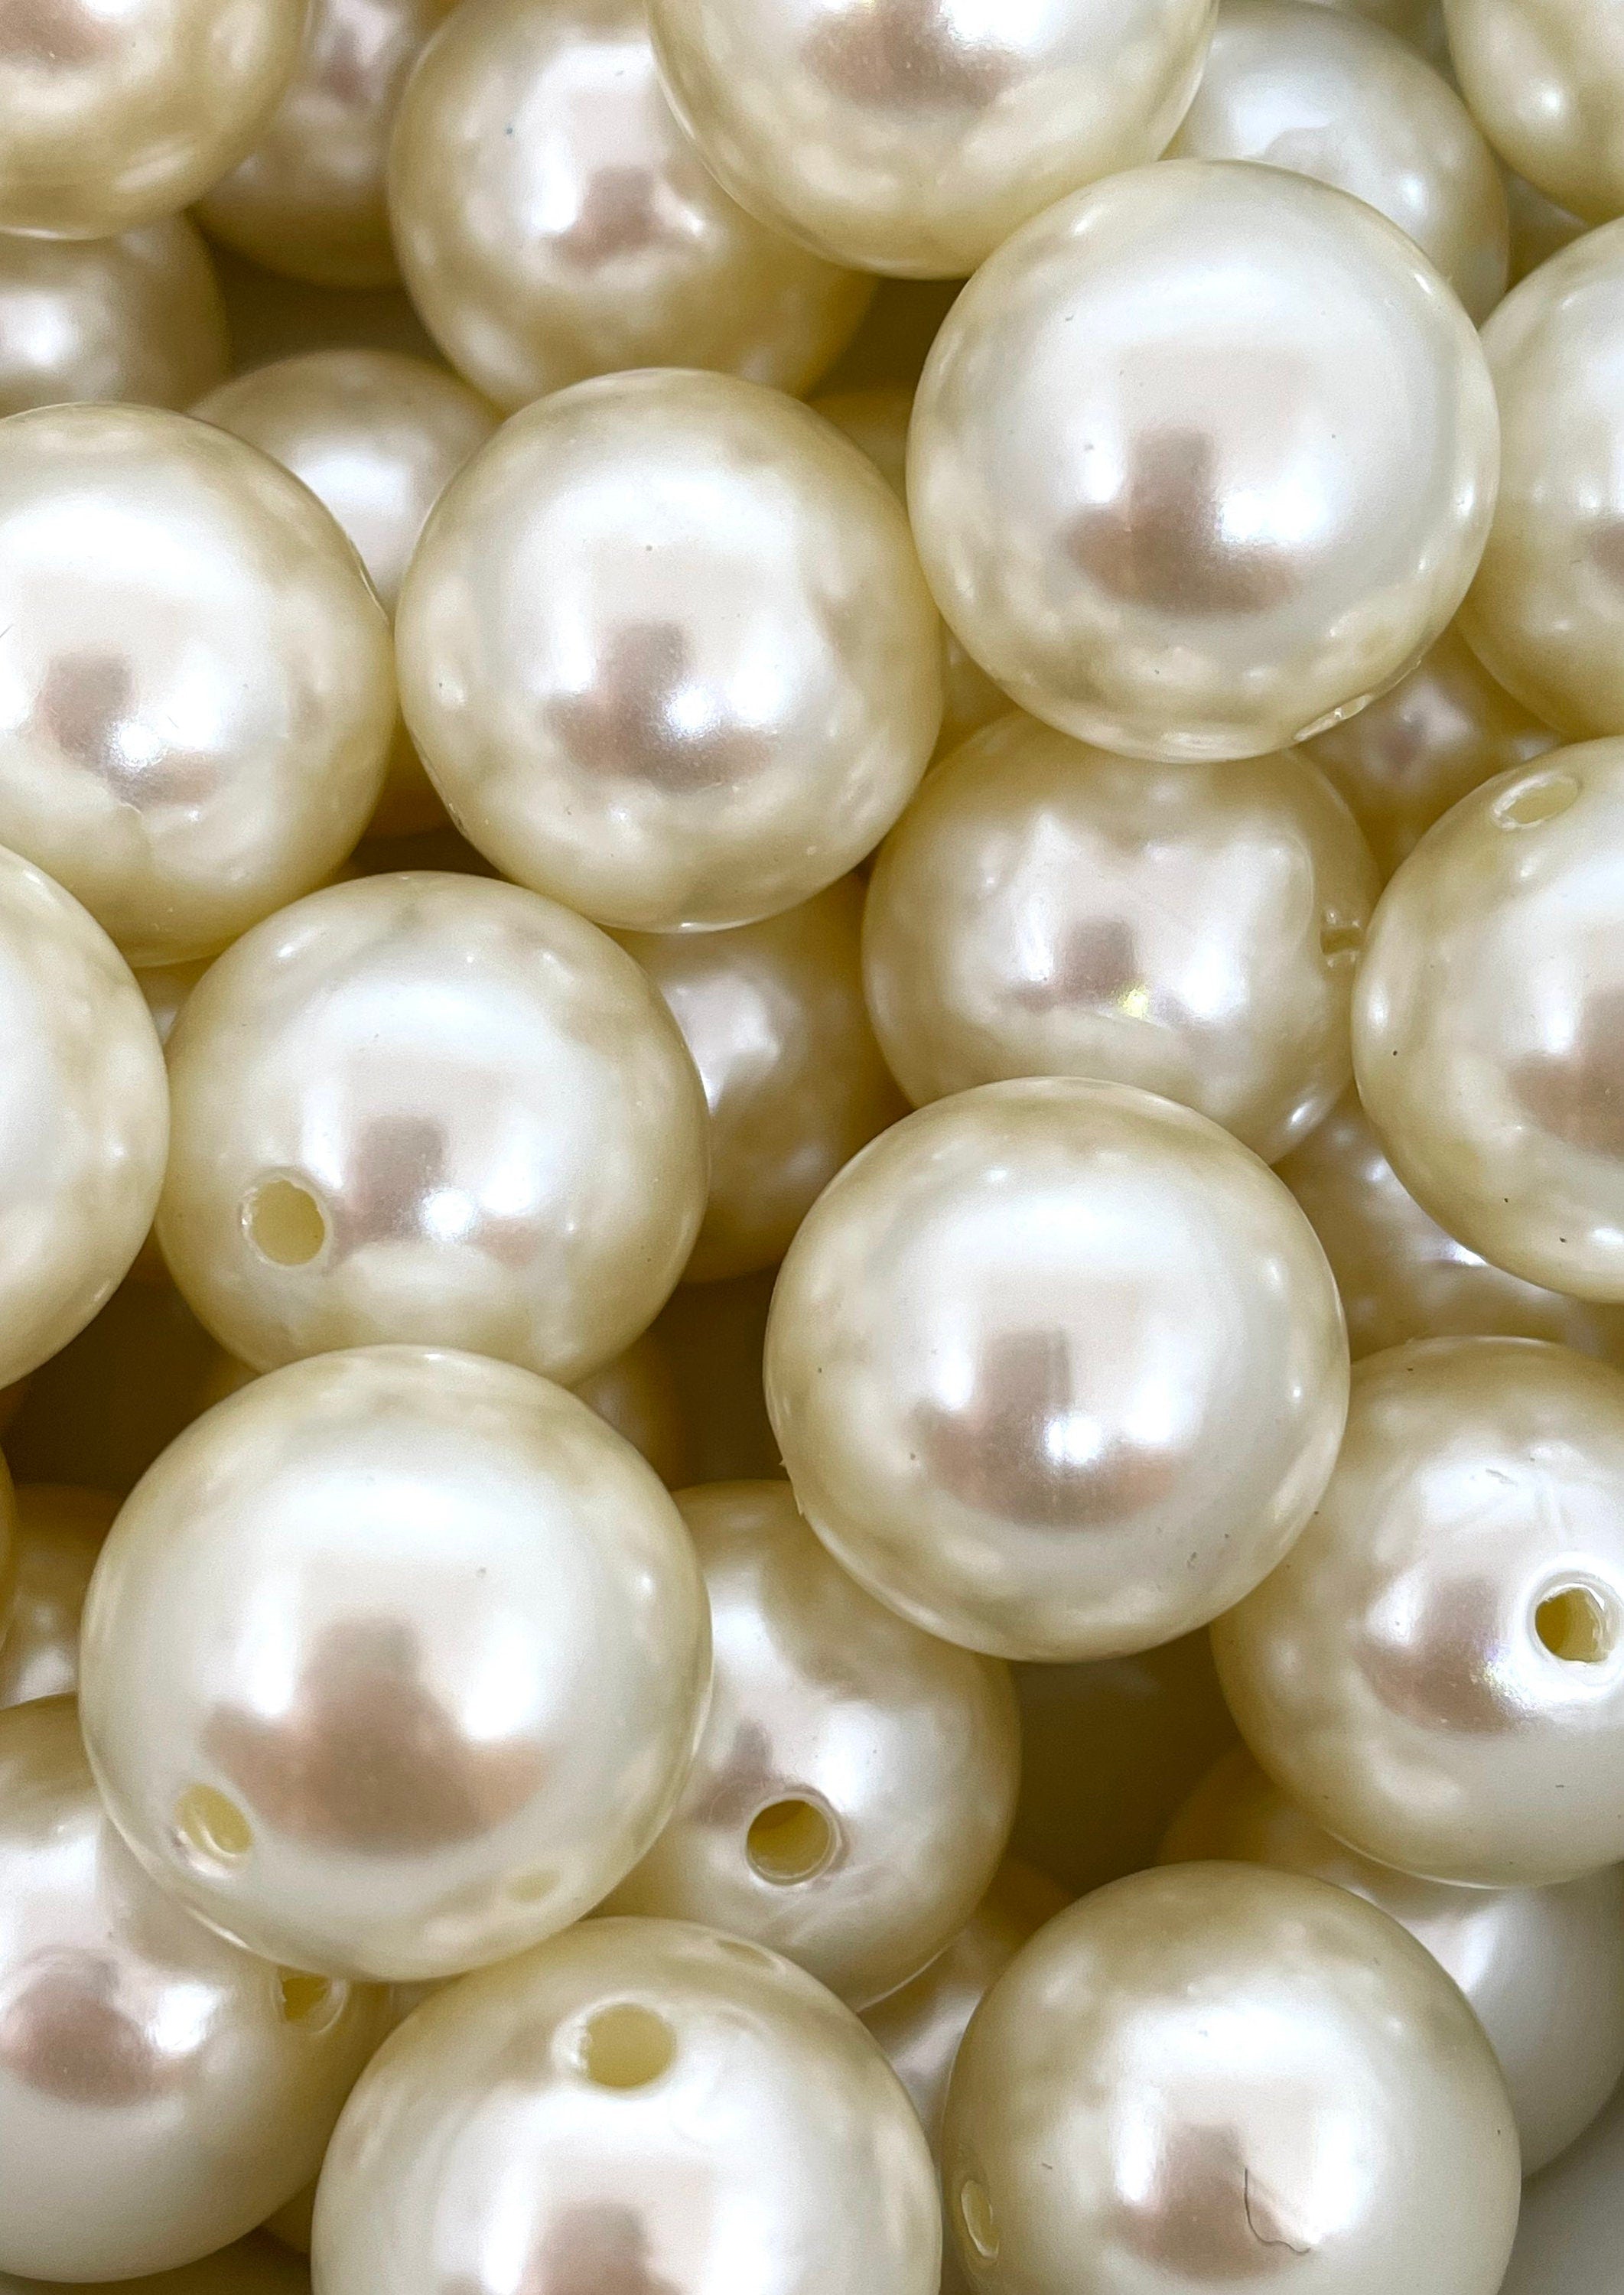 Chunky Ivory Pearl Beads for Jewelry Making, Chunky Beads, 20mm beads, Large Beads for Necklace